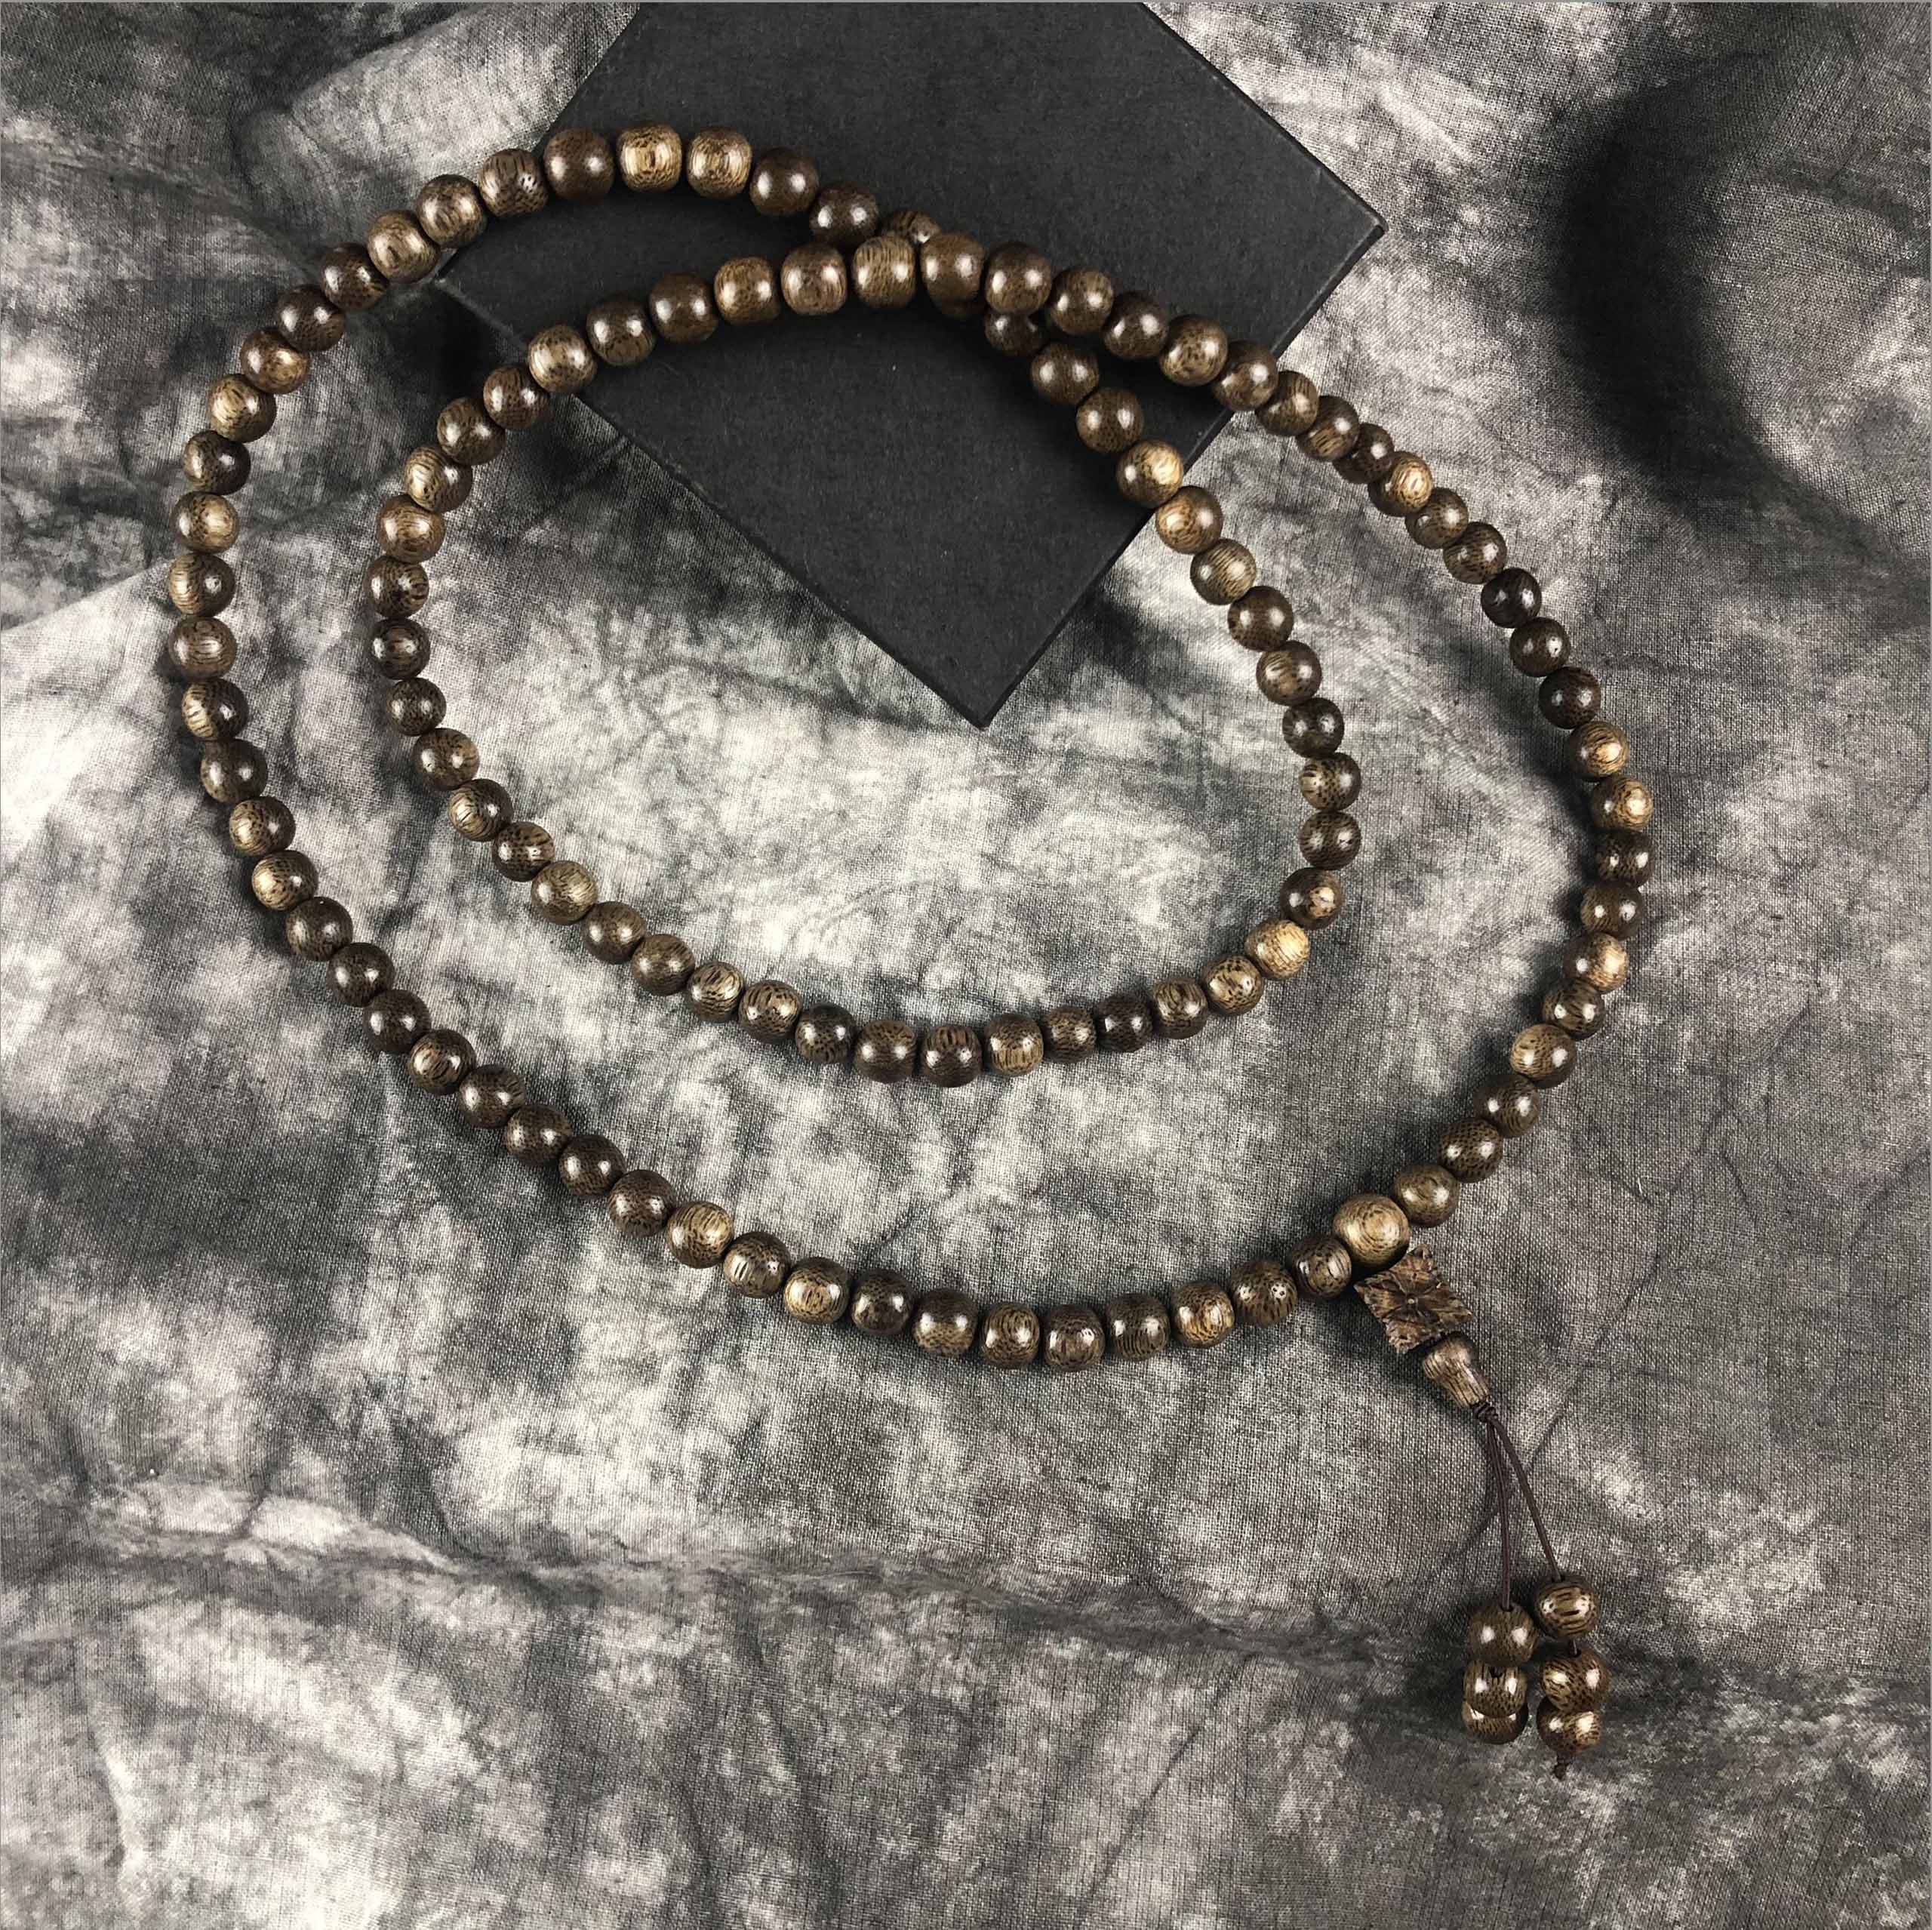 Agarwood necklace 8 cups 108 beads round gourd tail mixed with flowers Touch - VC4LHFA